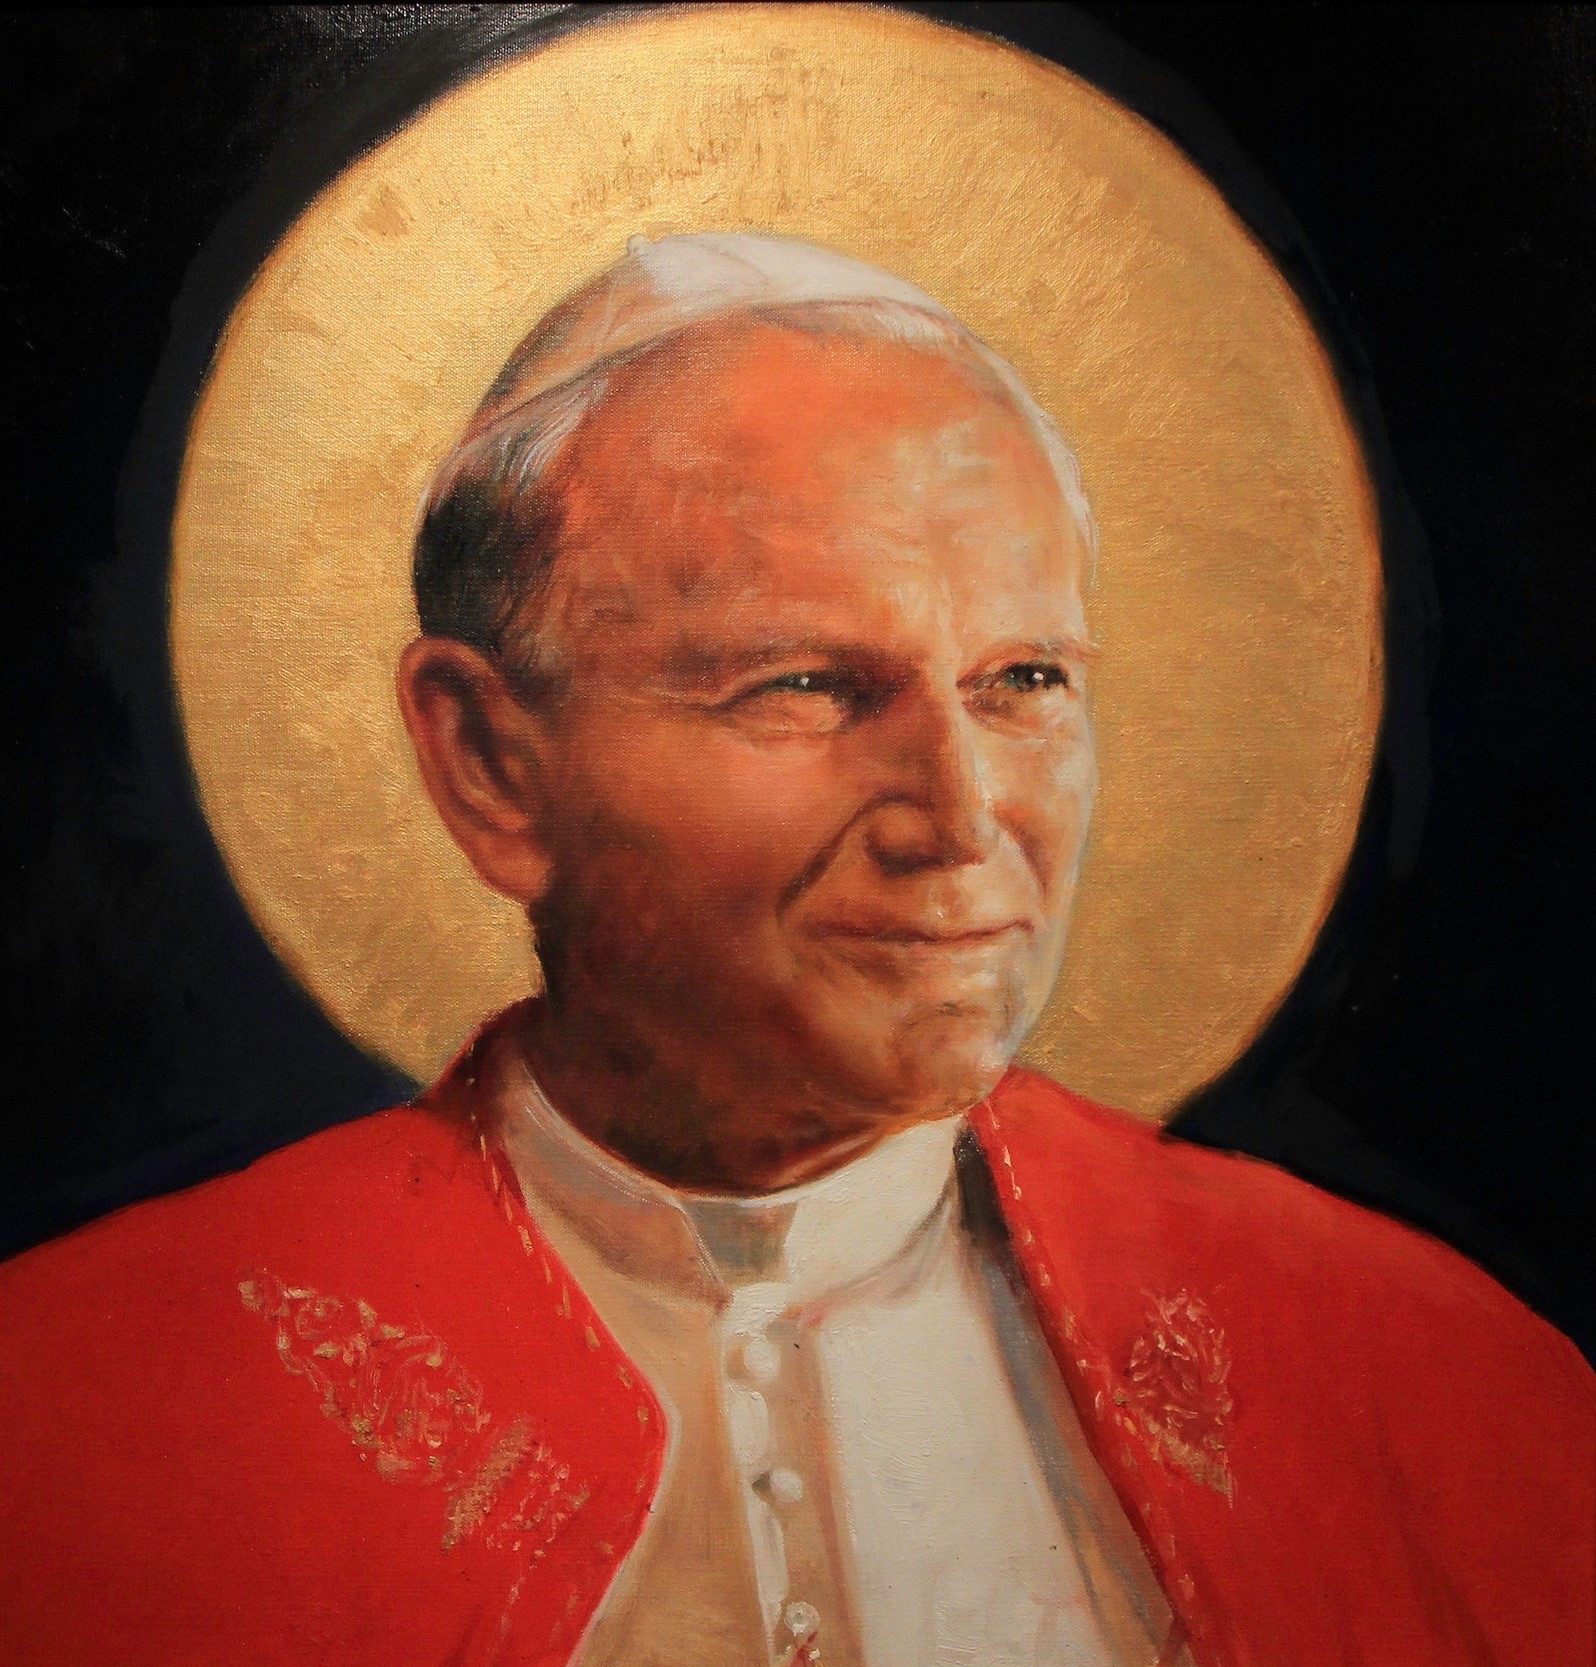 St. Pope John Paul II: The Book Was the Turning Point of My Life